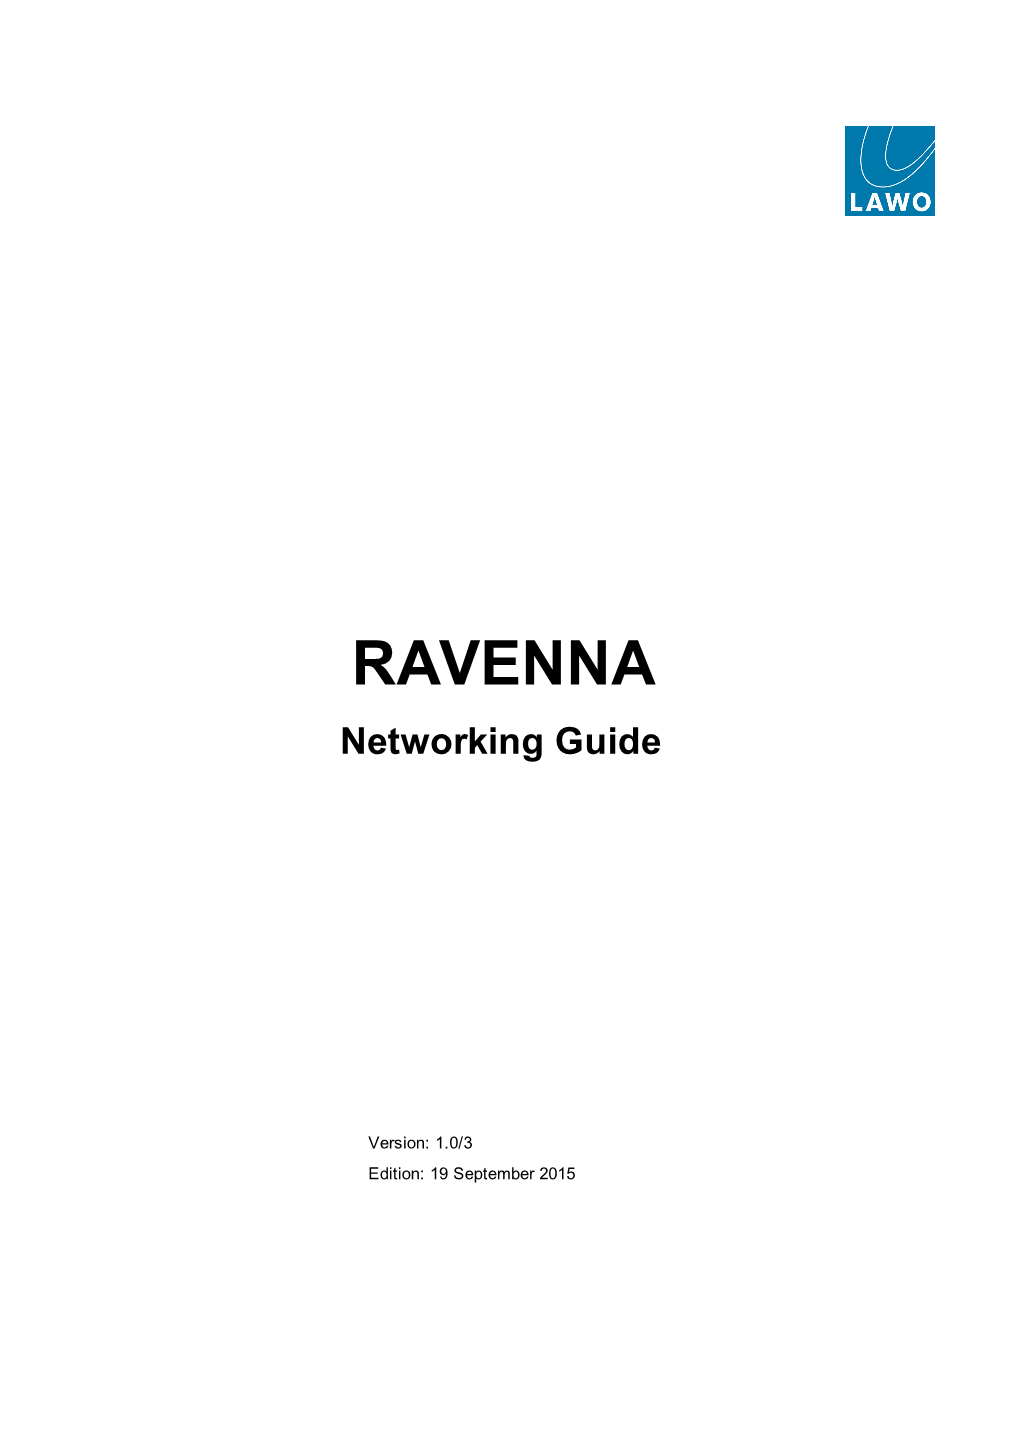 RAVENNA Networking Guide